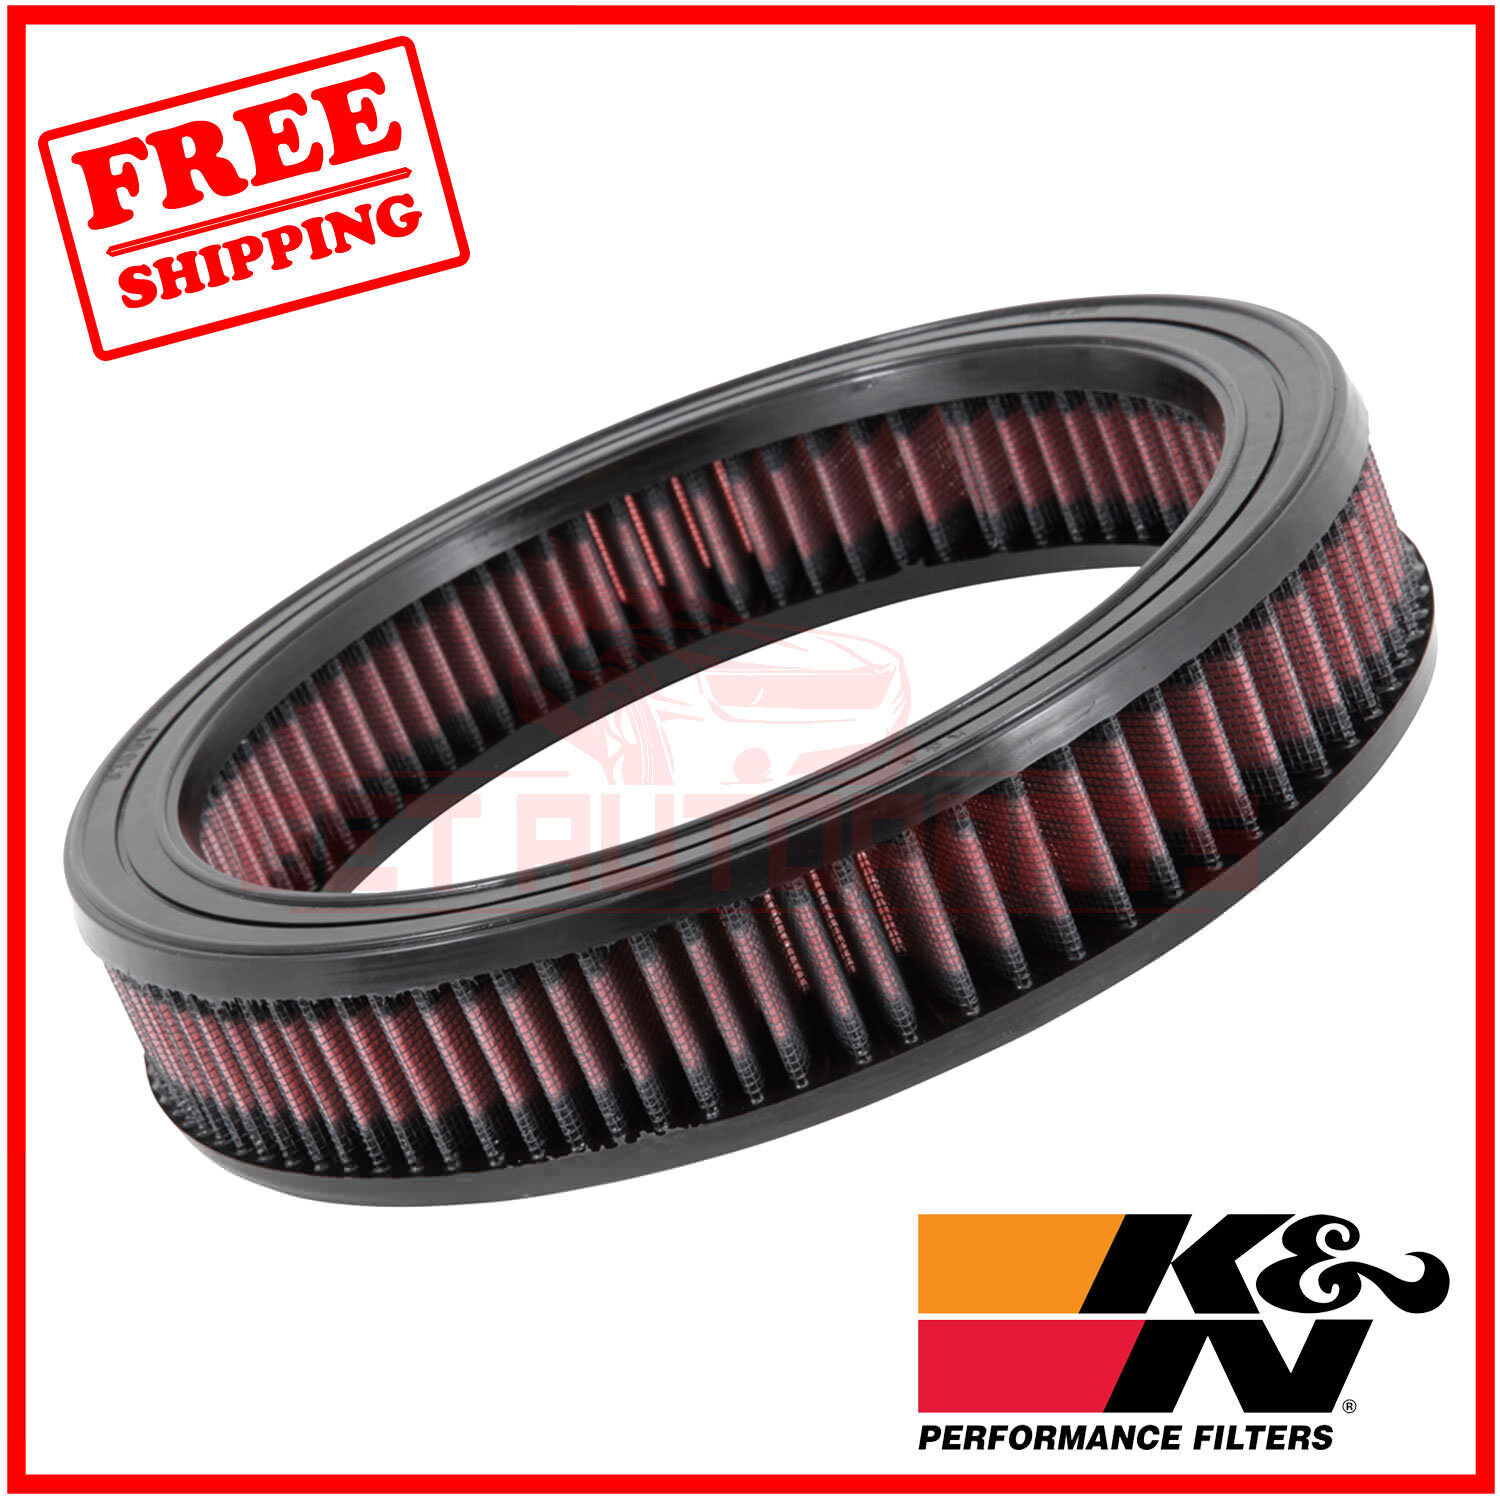 K&N Replacement Air Filter for Oldsmobile Starfire 1975-1979